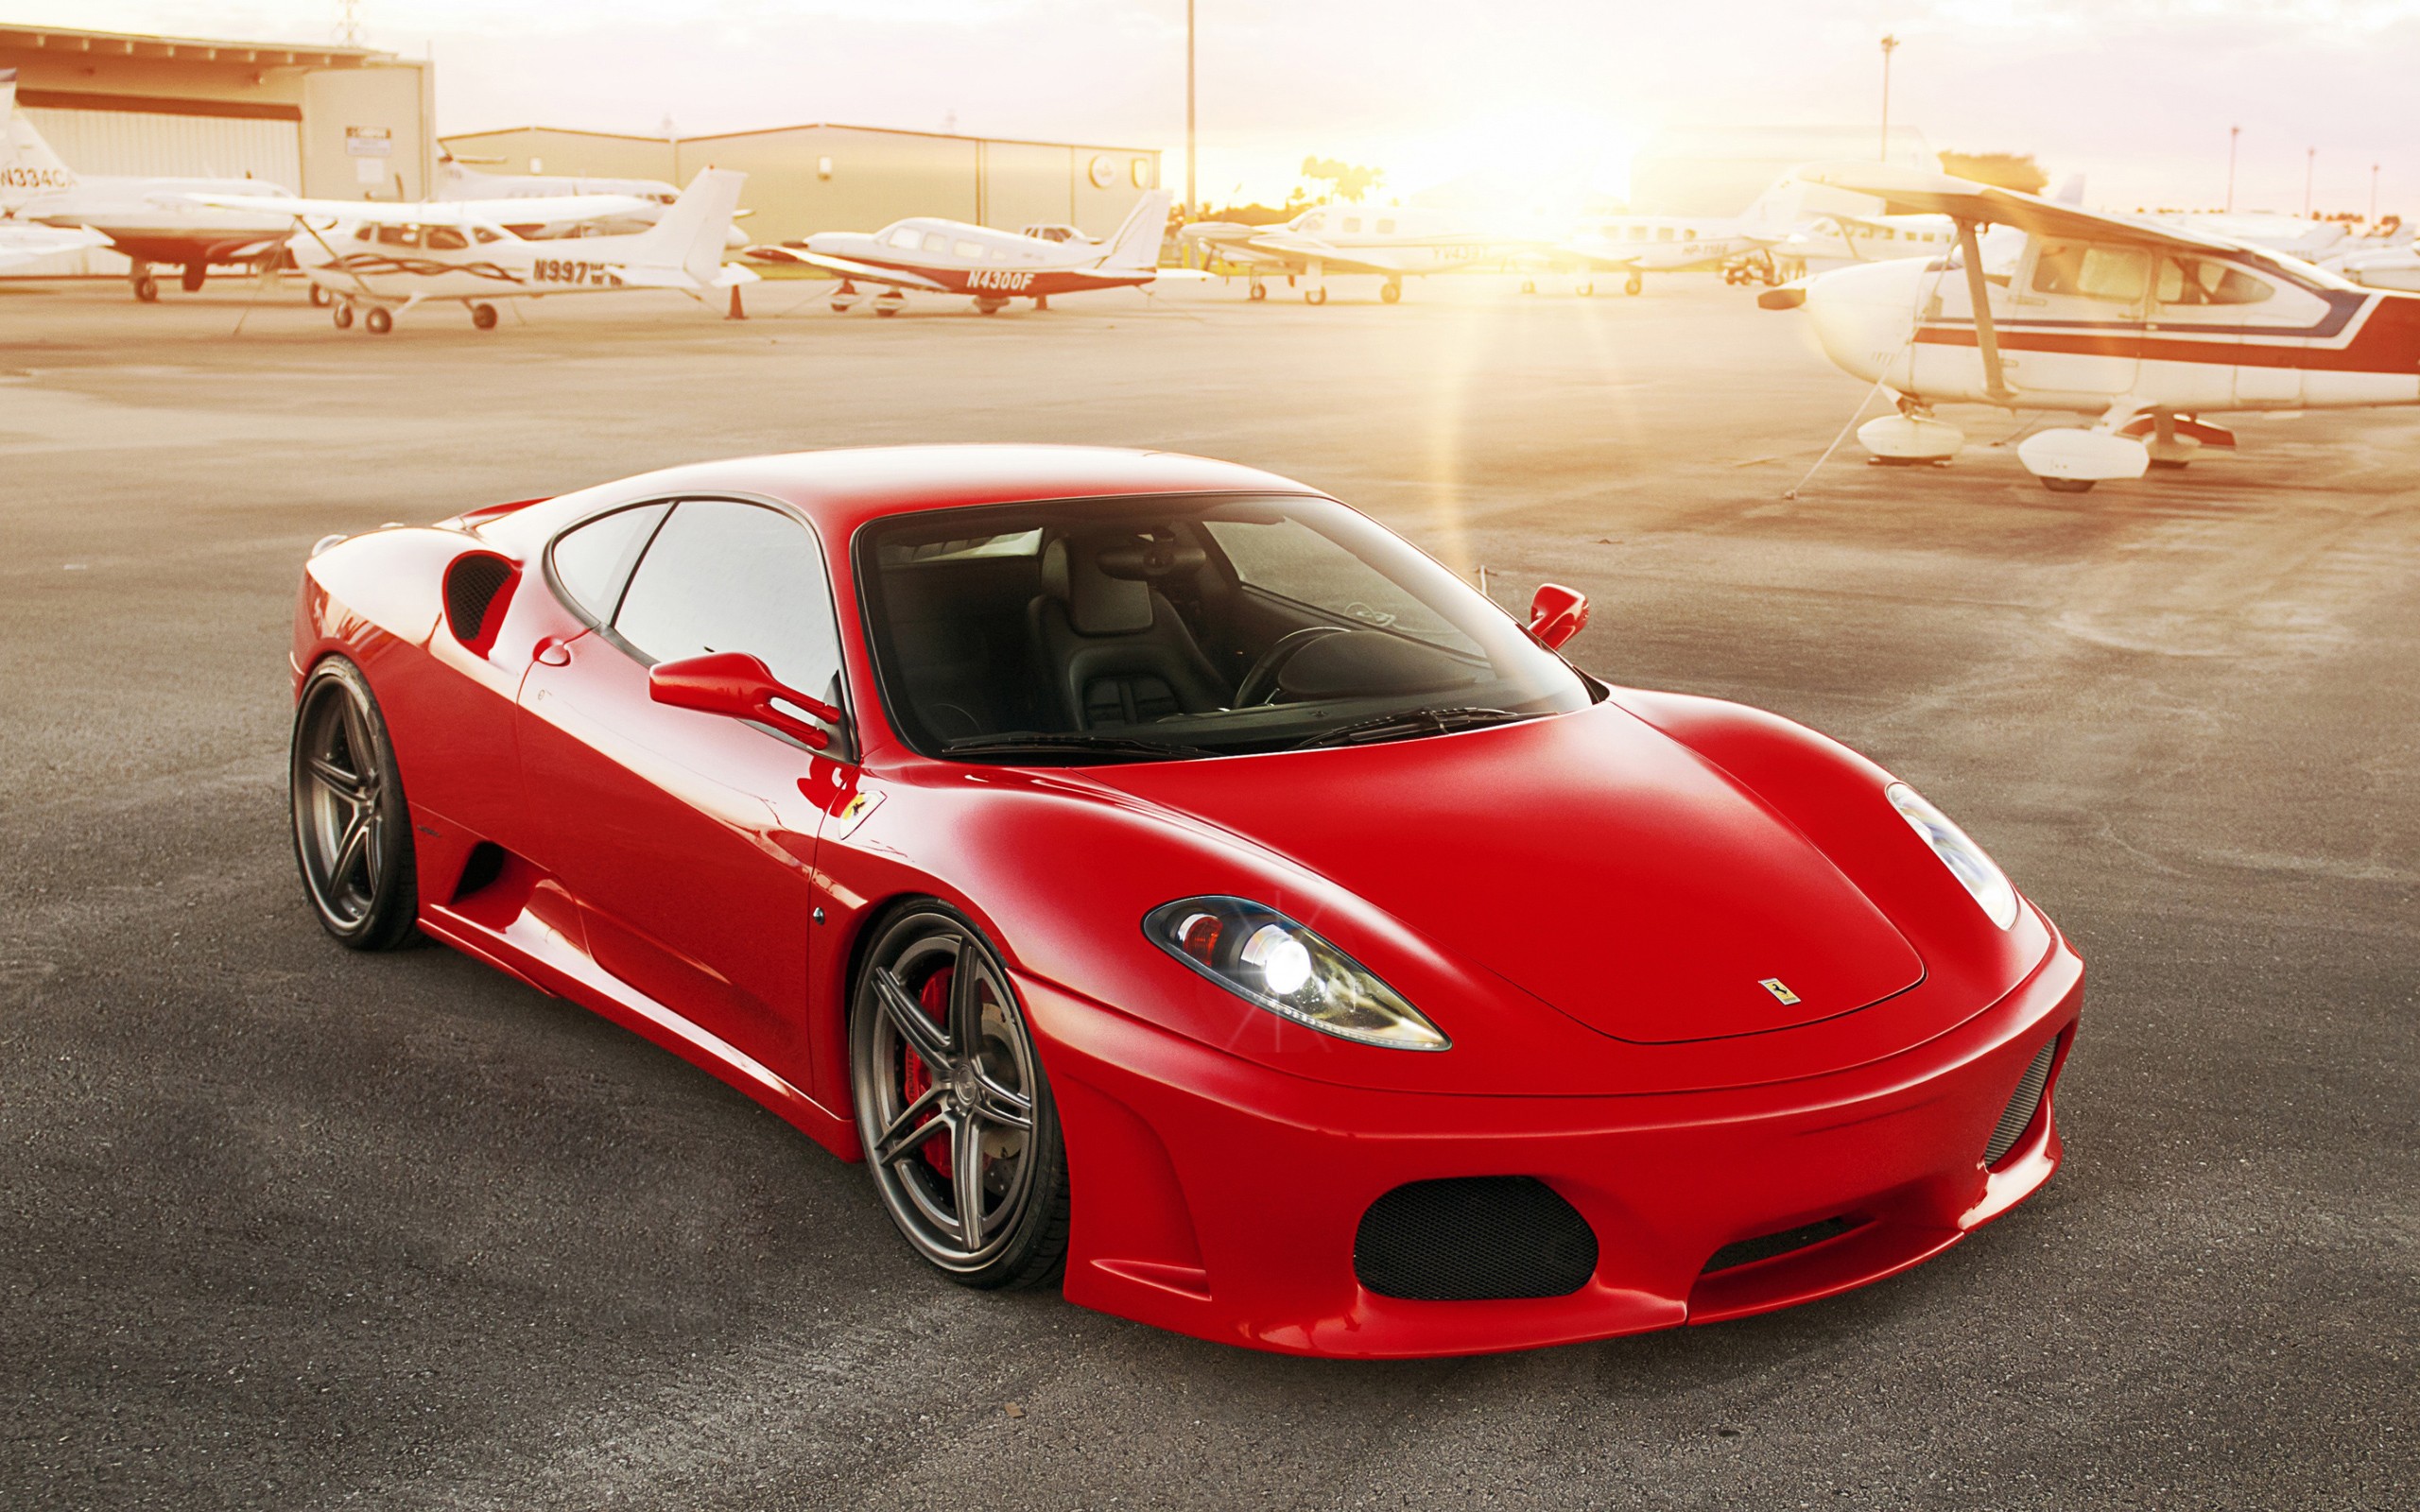 Awesome Red Ferrari Wallpaper 36314 2560x1600px 2560x1600